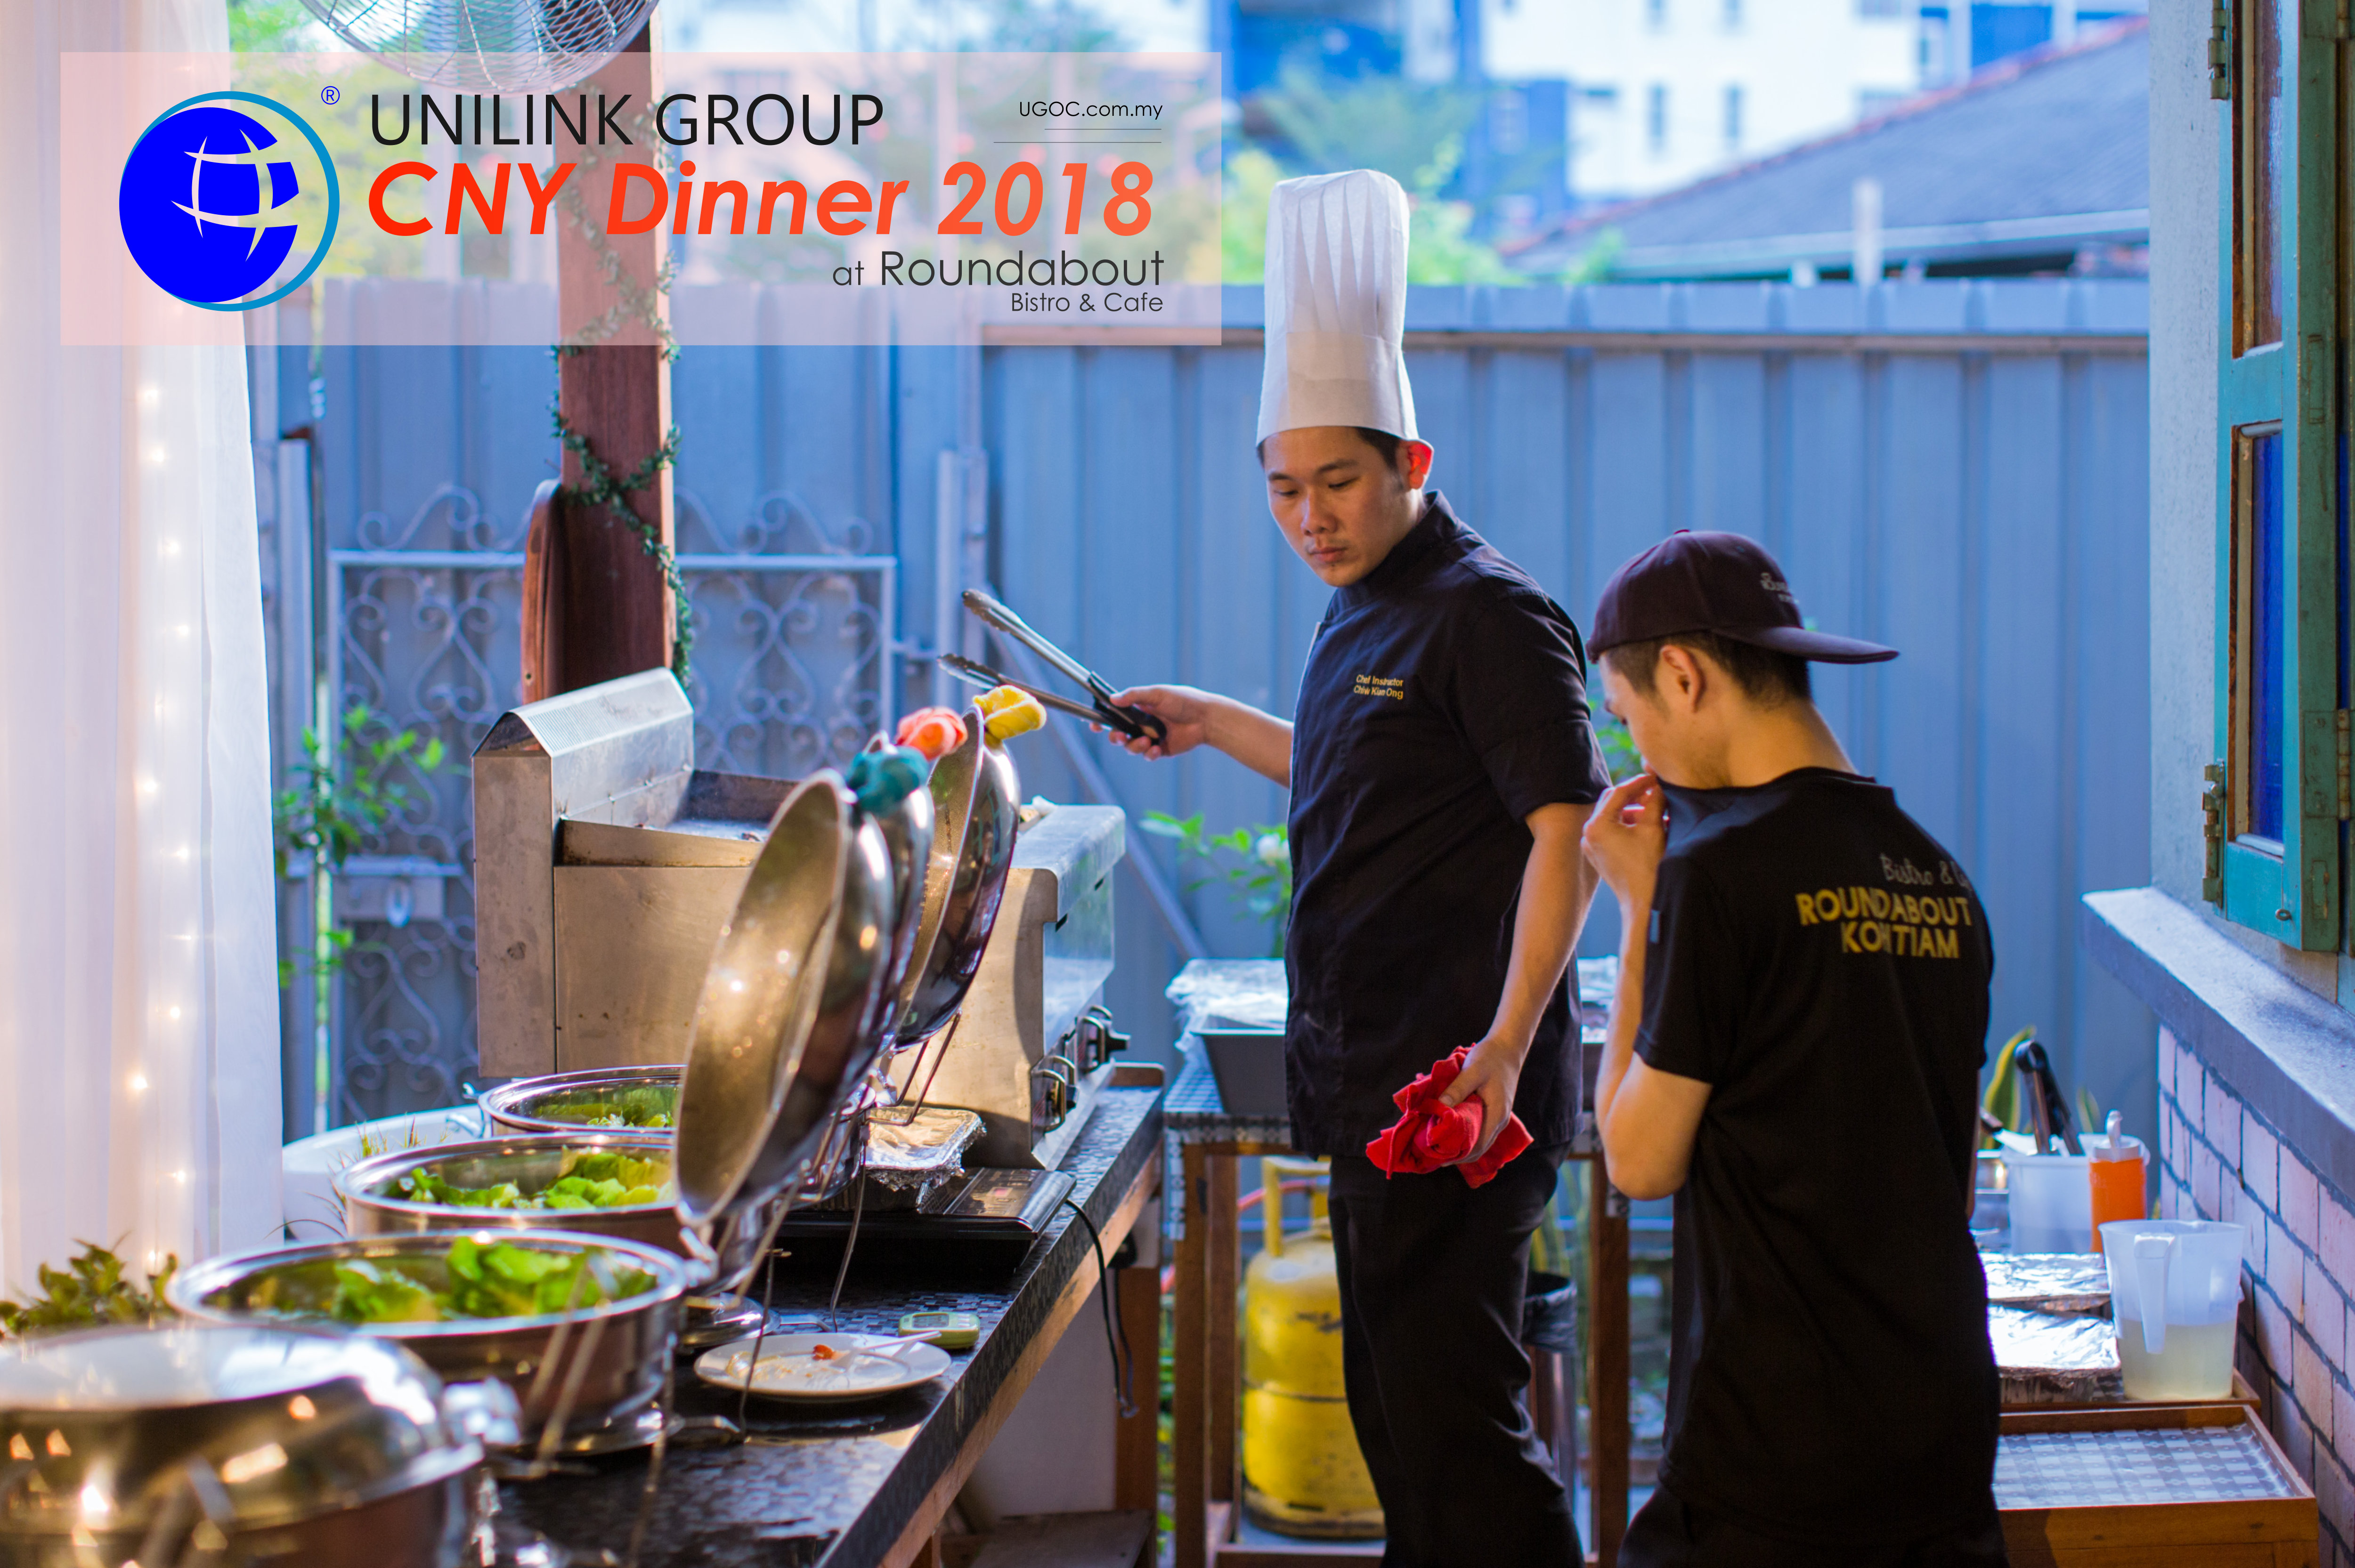 Unilink Group Chinese New Year Dinner 2018 from Agensi Pekerjaan Unilink Prospects Sdn Bhd at Roundabout Bisrto and Cafe 27